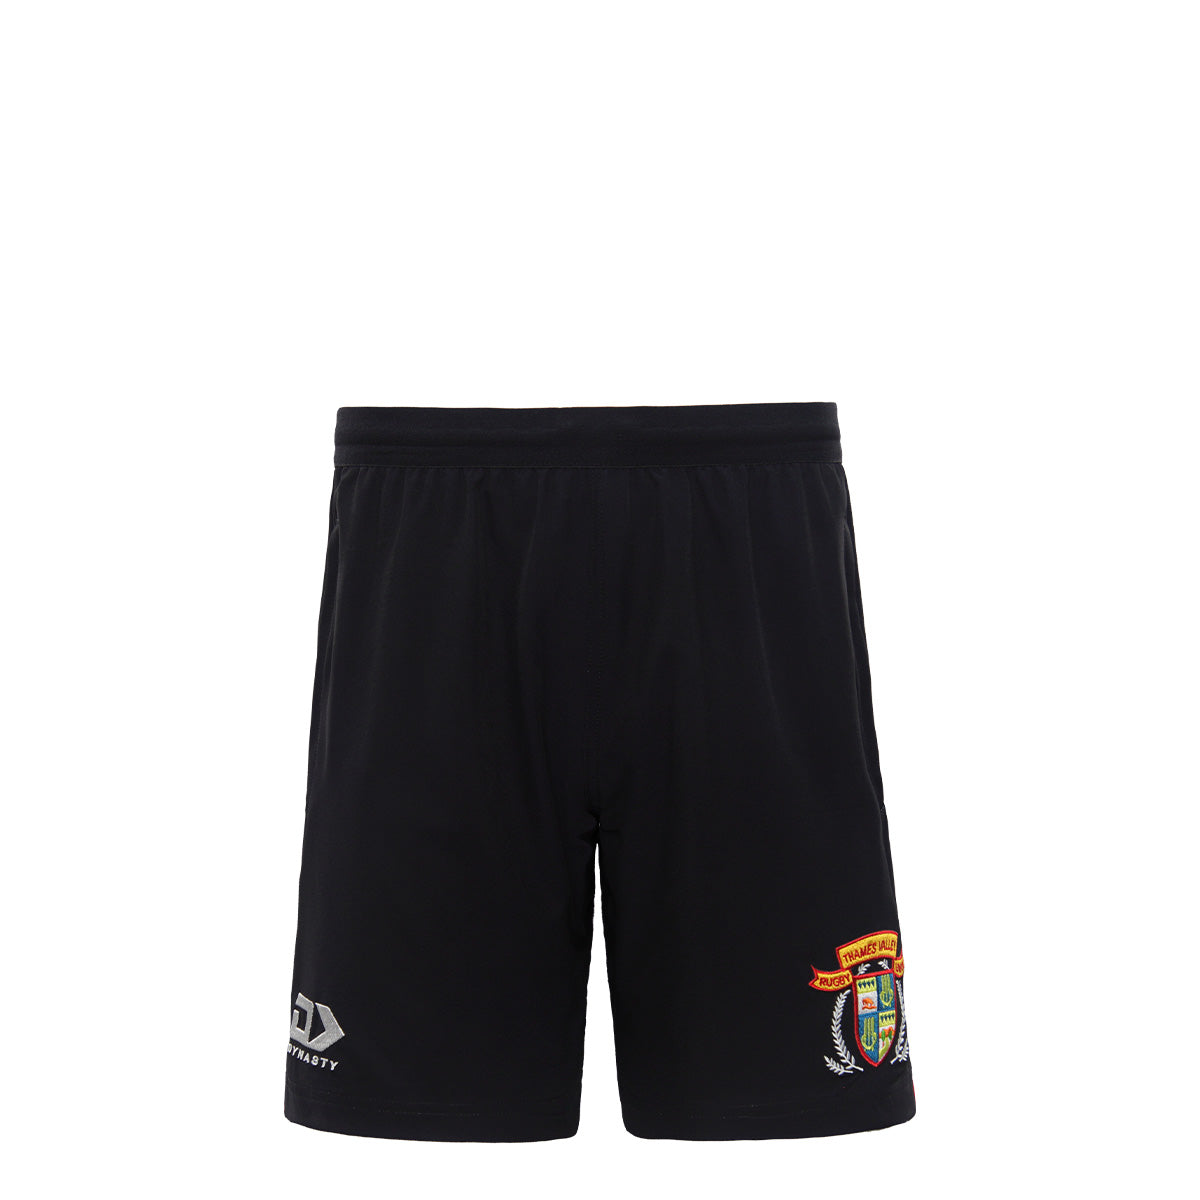 Thames Valley Swampfoxes Gym Short